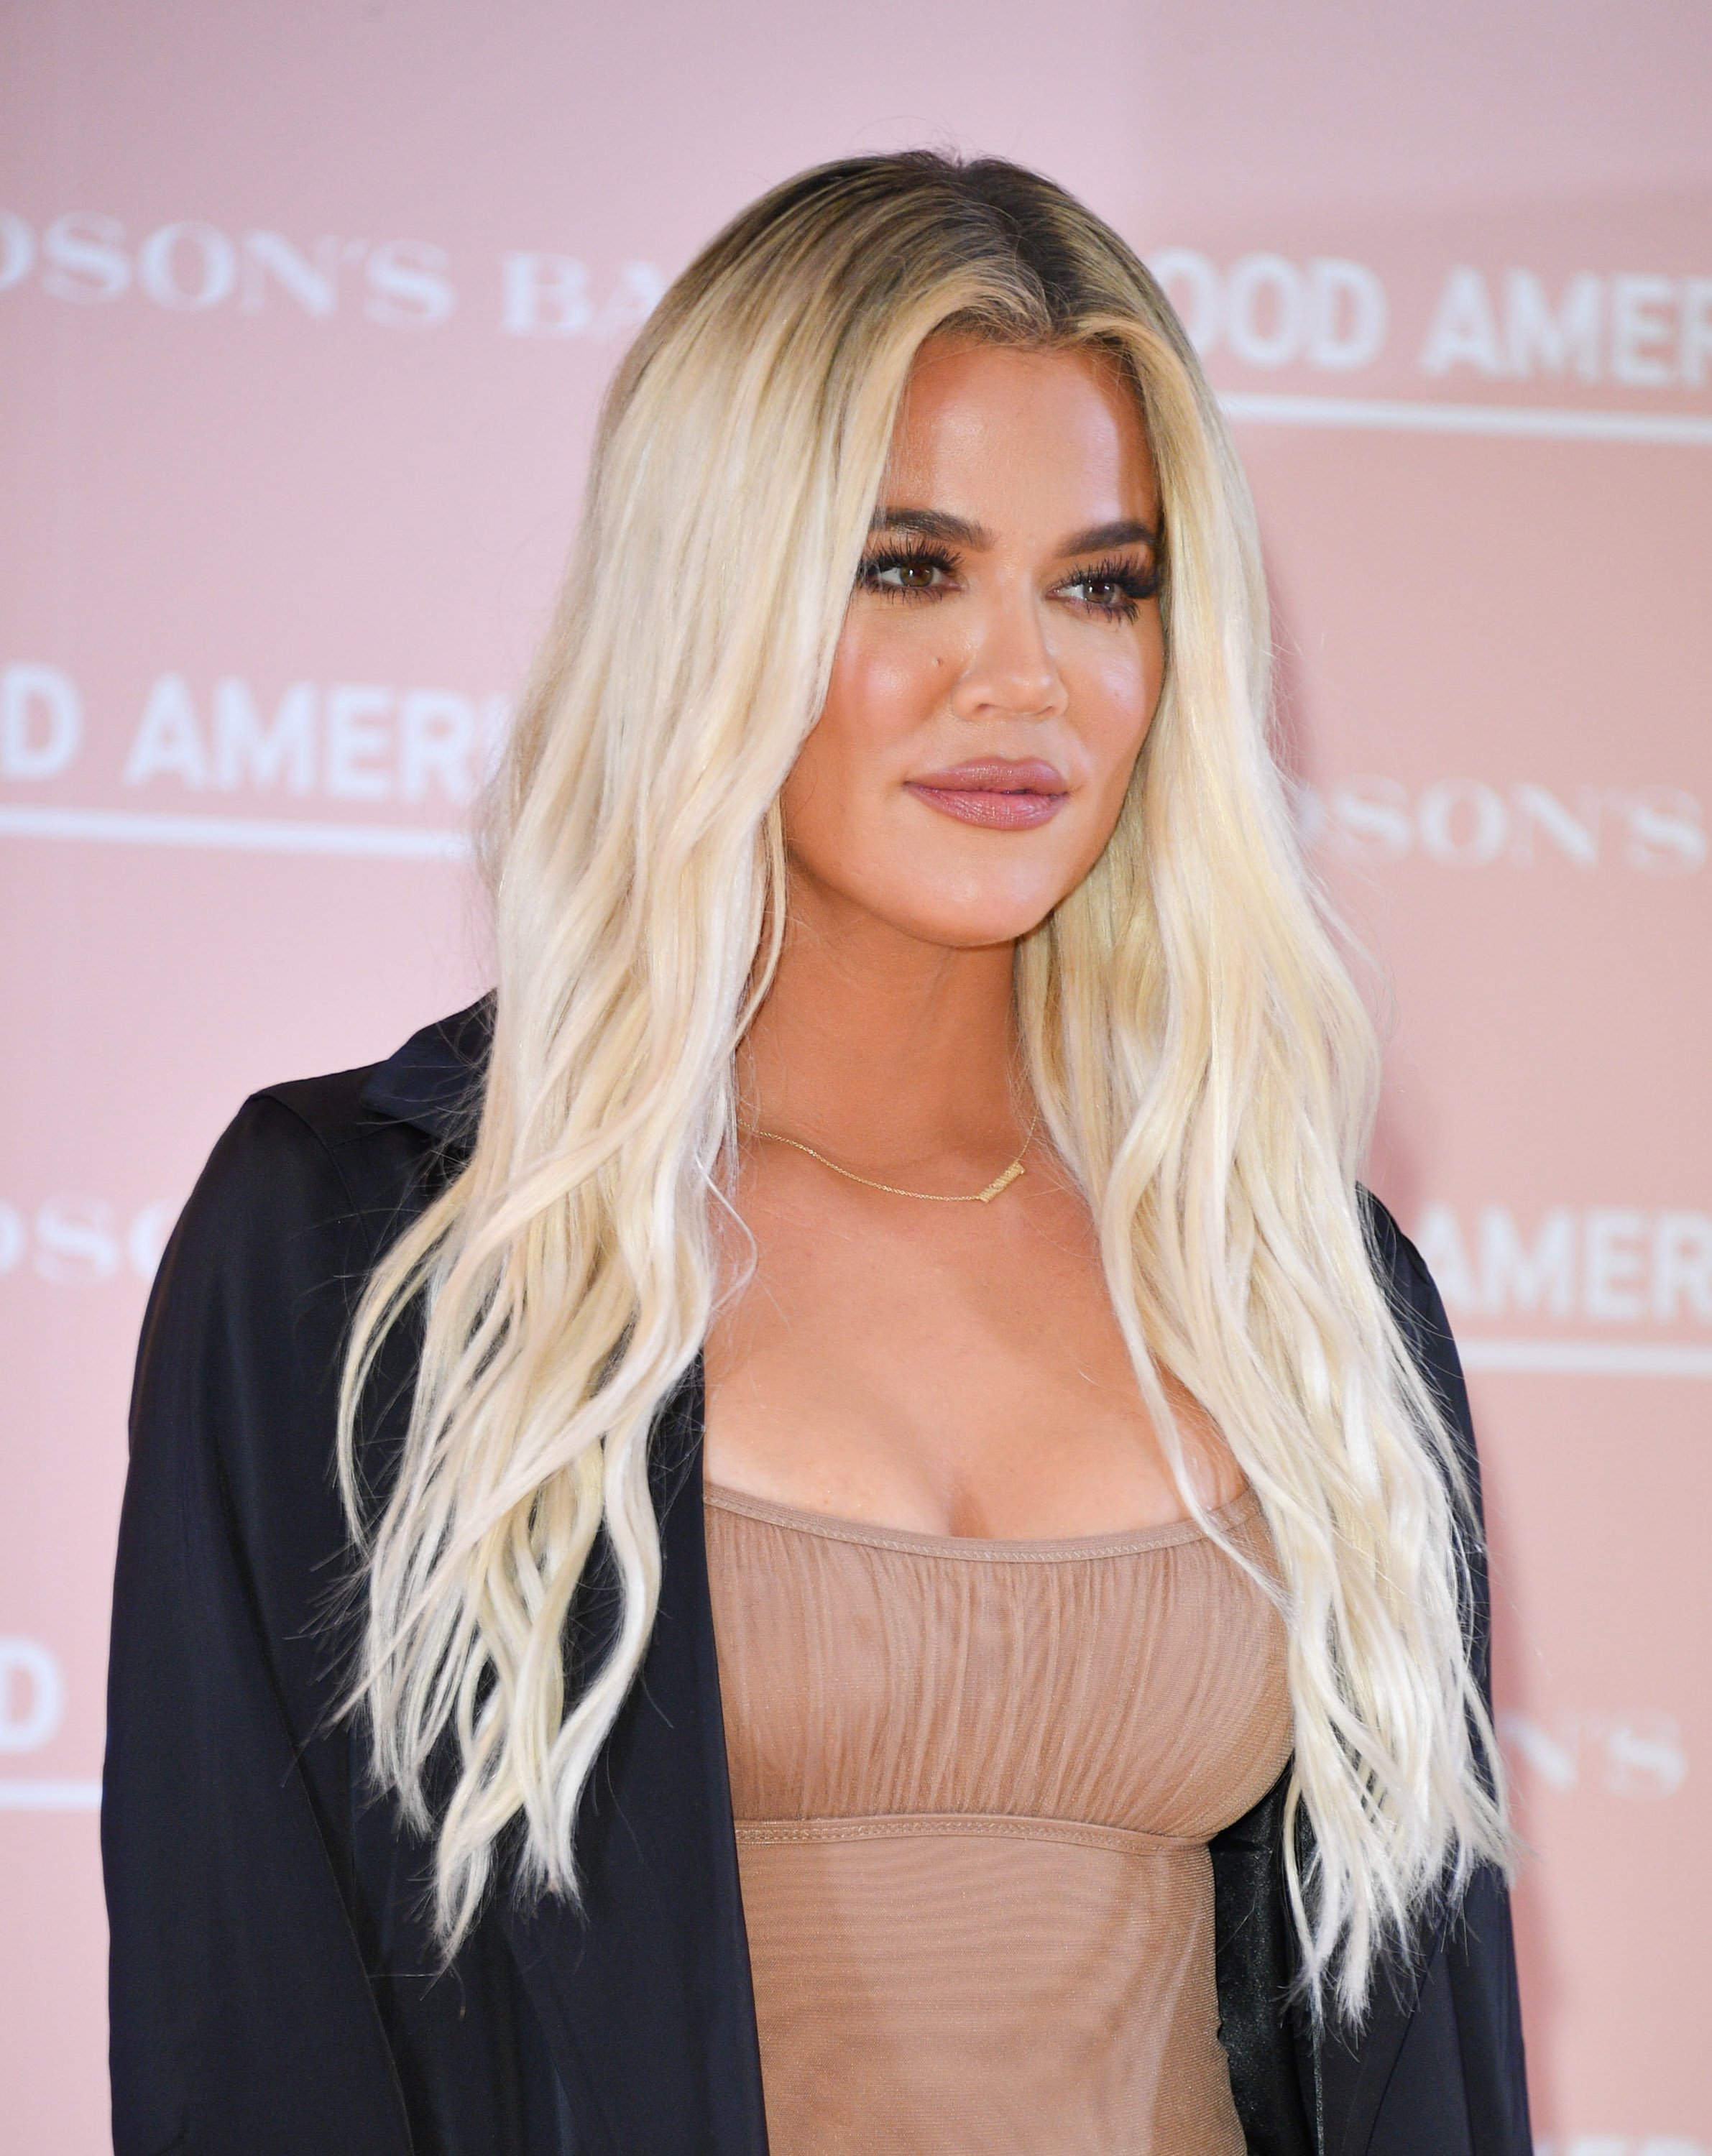 Khloe Kardashian attends Hudson's Bay's launch of Good American in Toronto on September 18, 2019. | Source: Getty Images.